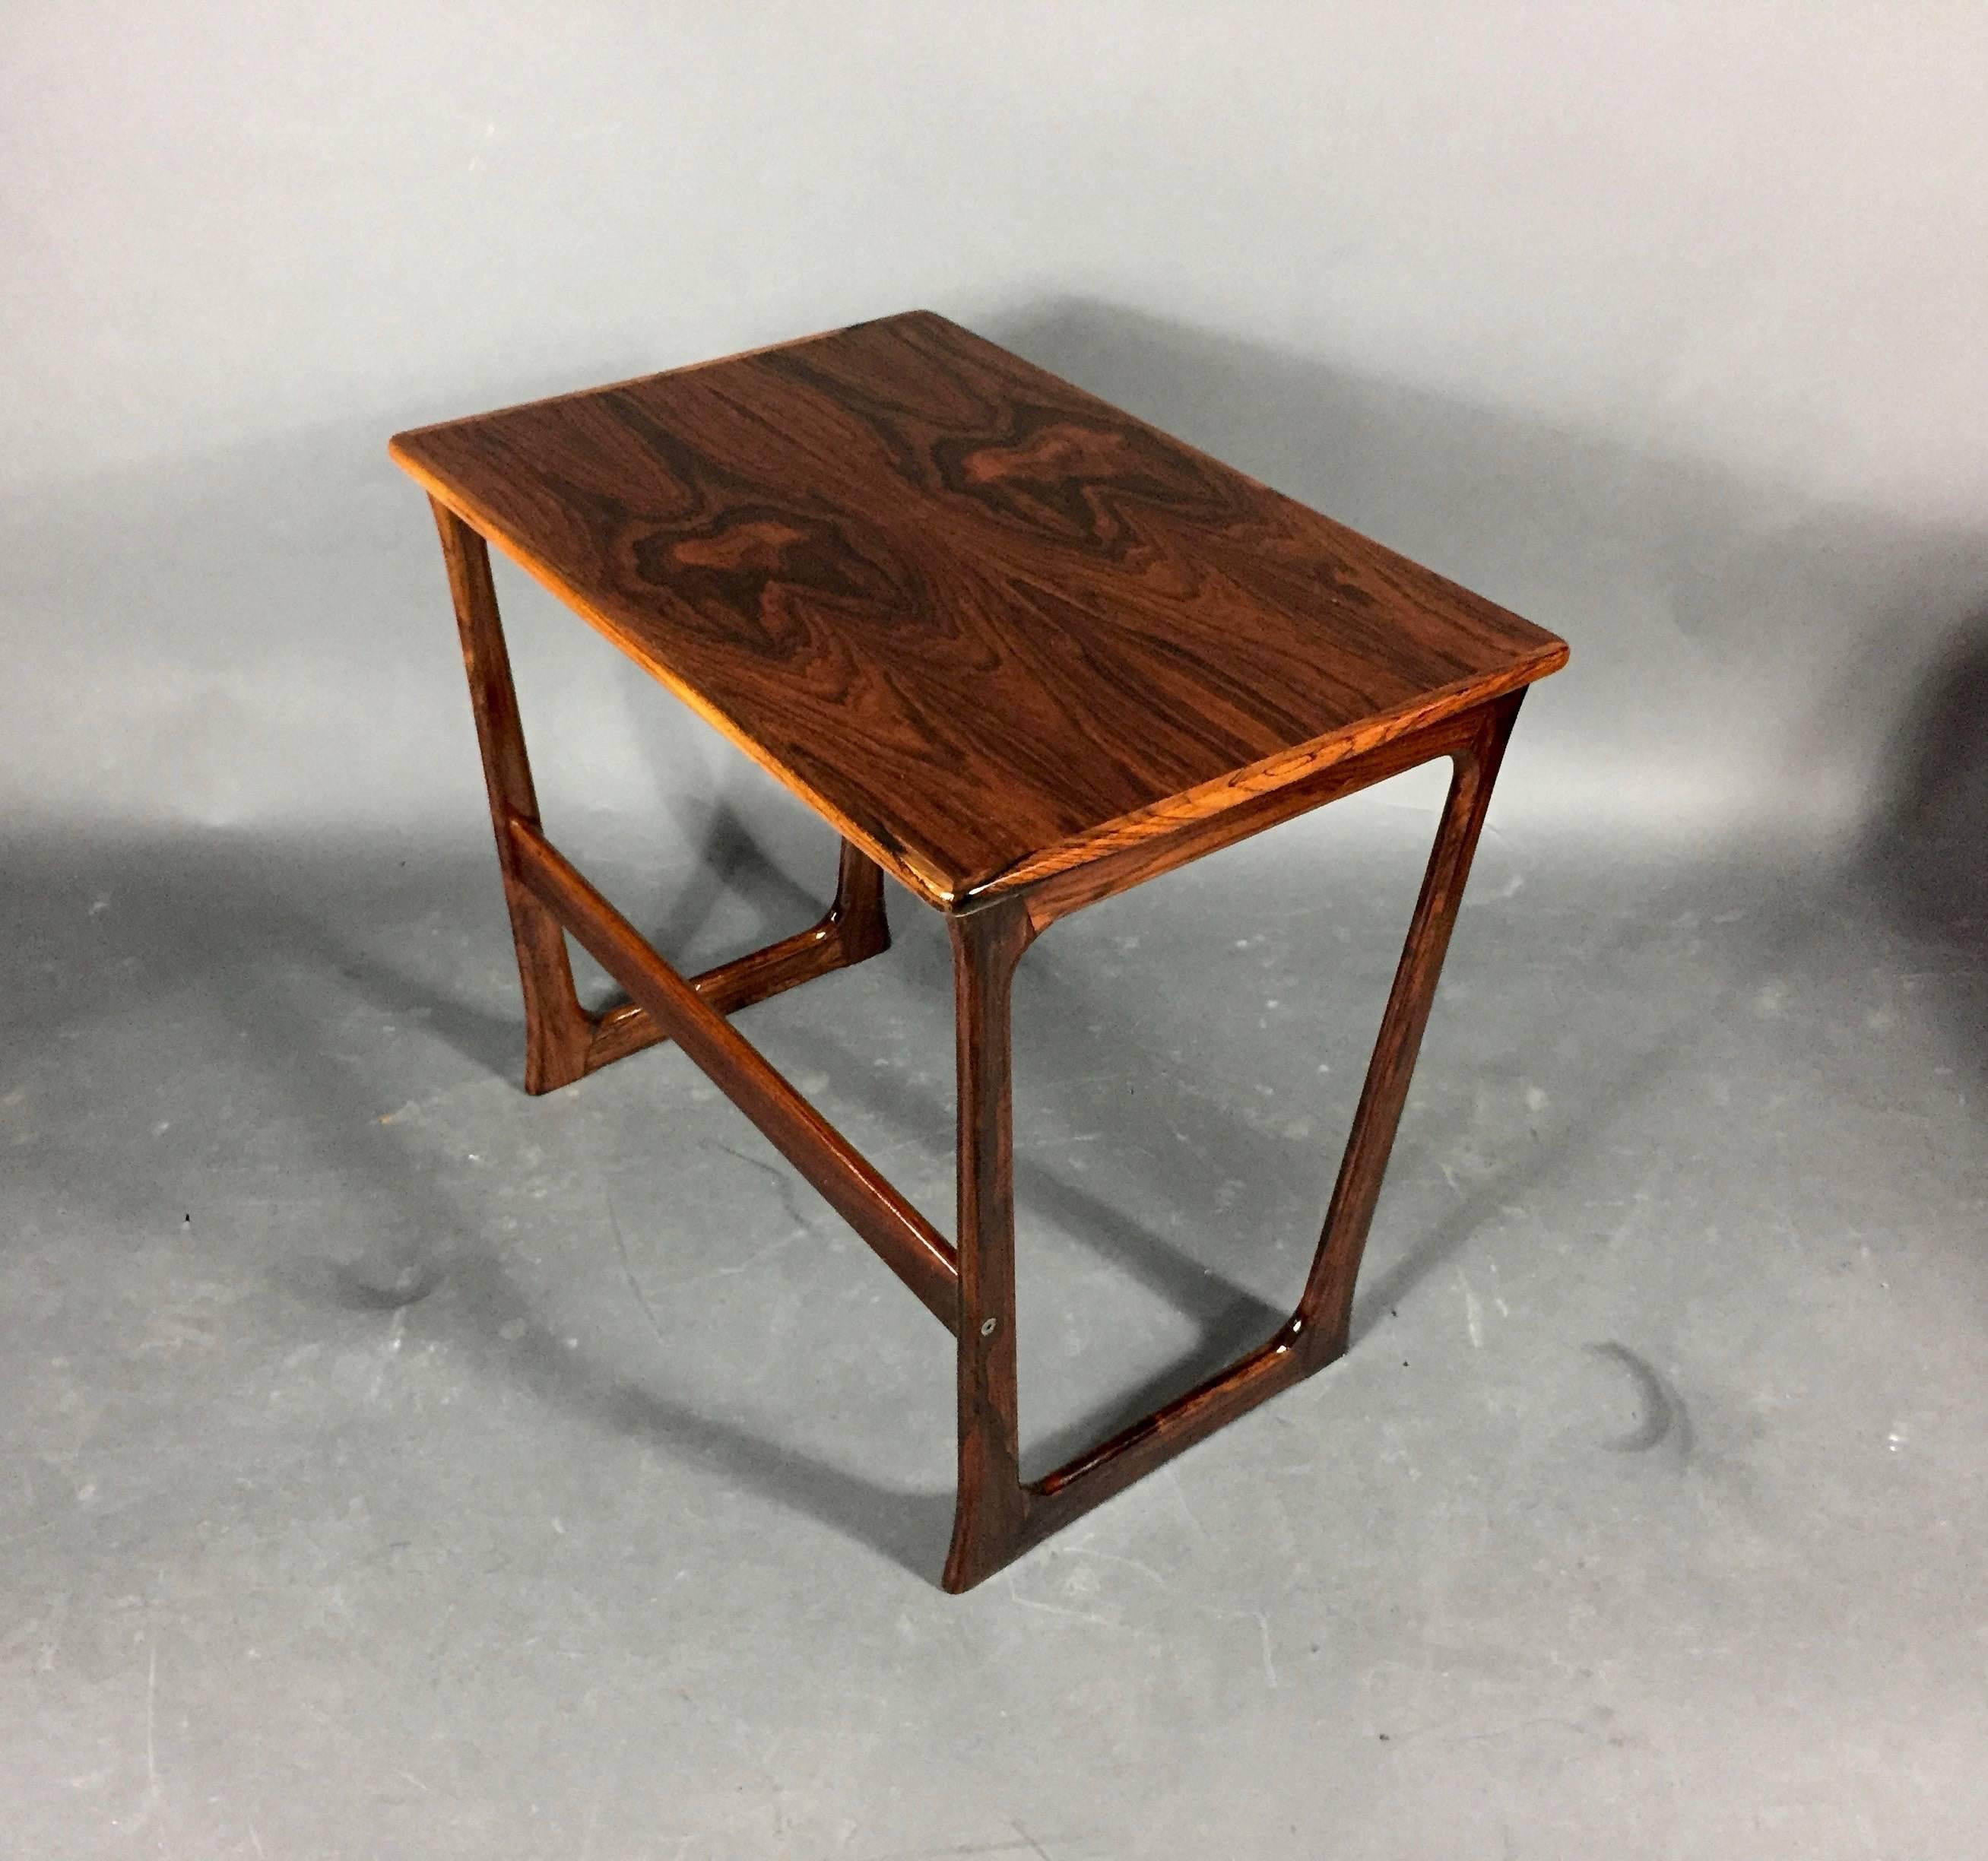 Mid-20th Century American Modern Square-Base Rosewood Nesting Tables, 1960s